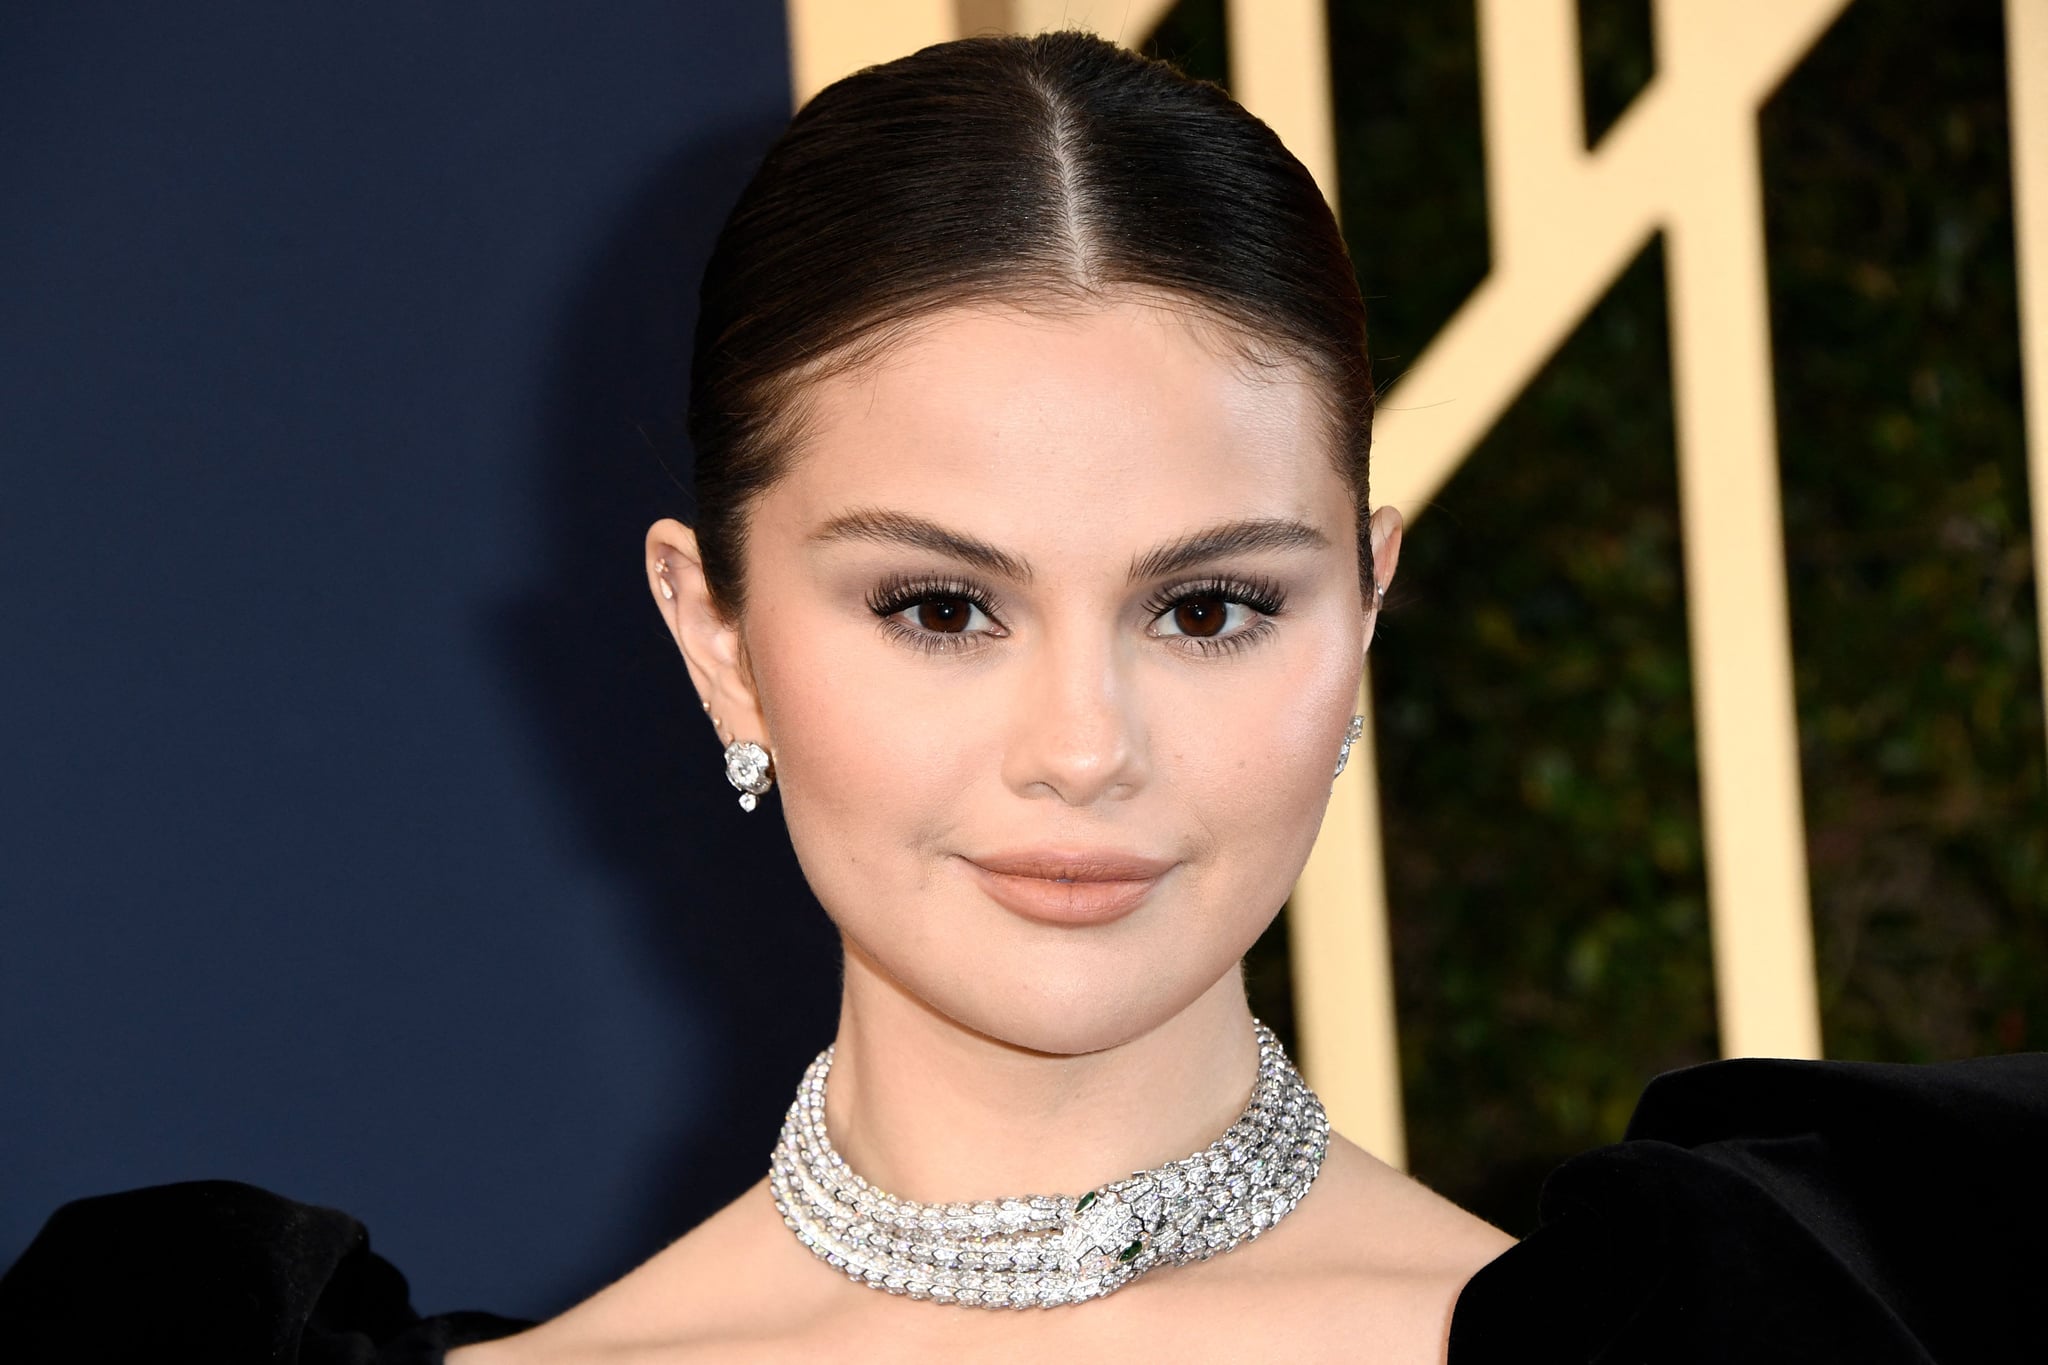 US singer Selena Gomez arrives for the 28th Annual Screen Actors Guild (SAG) Awards at the Barker Hangar in Santa Monica, California, on February 27, 2022. (Photo by Patrick T. FALLON / AFP) (Photo by PATRICK T. FALLON/AFP via Getty Images)